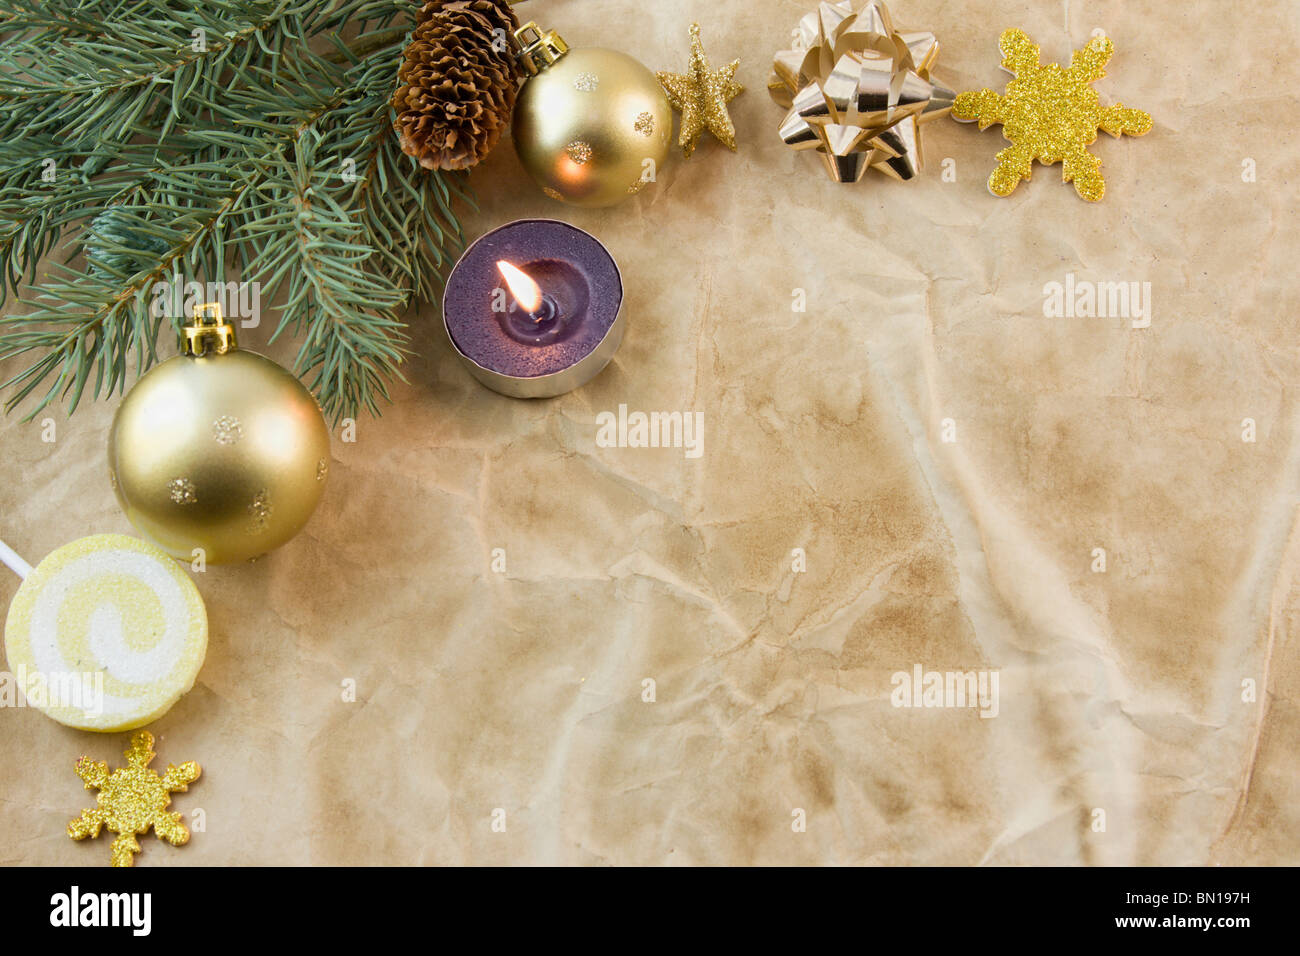 Christmas corner frame with purple tea light, fir branch, gold elements on antique paper with copyspace Stock Photo